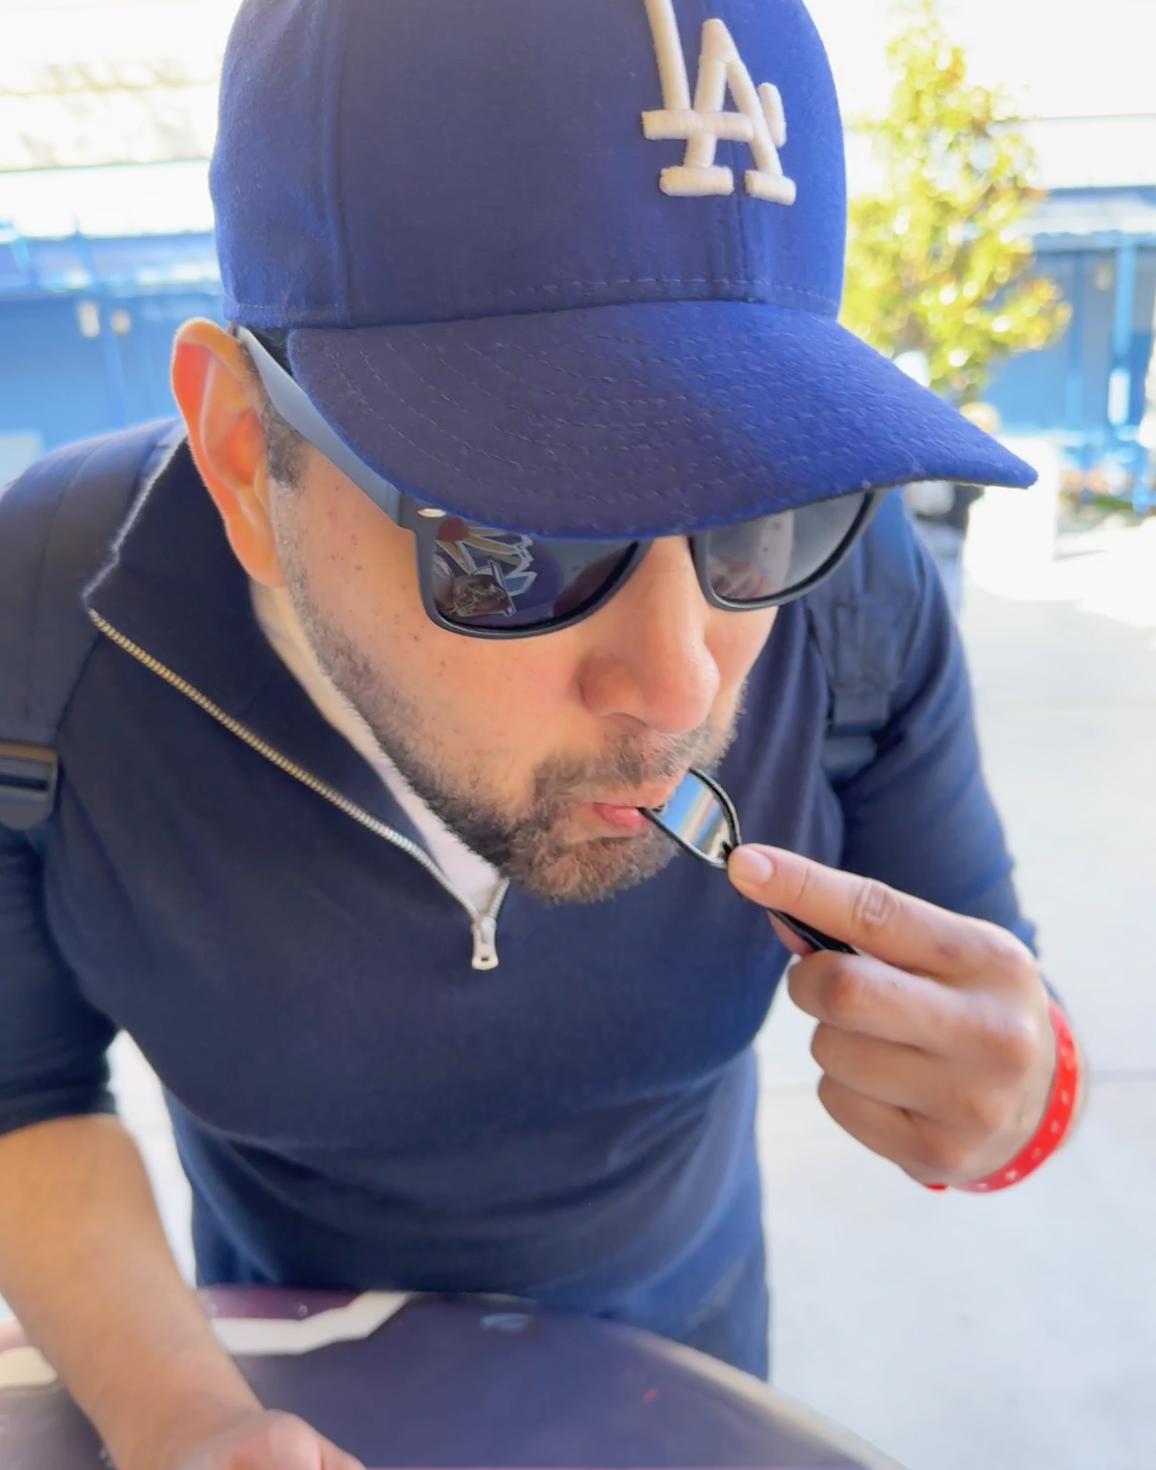 Man in baseball cap using a whistle, outdoors, possibly at a sports or travel event